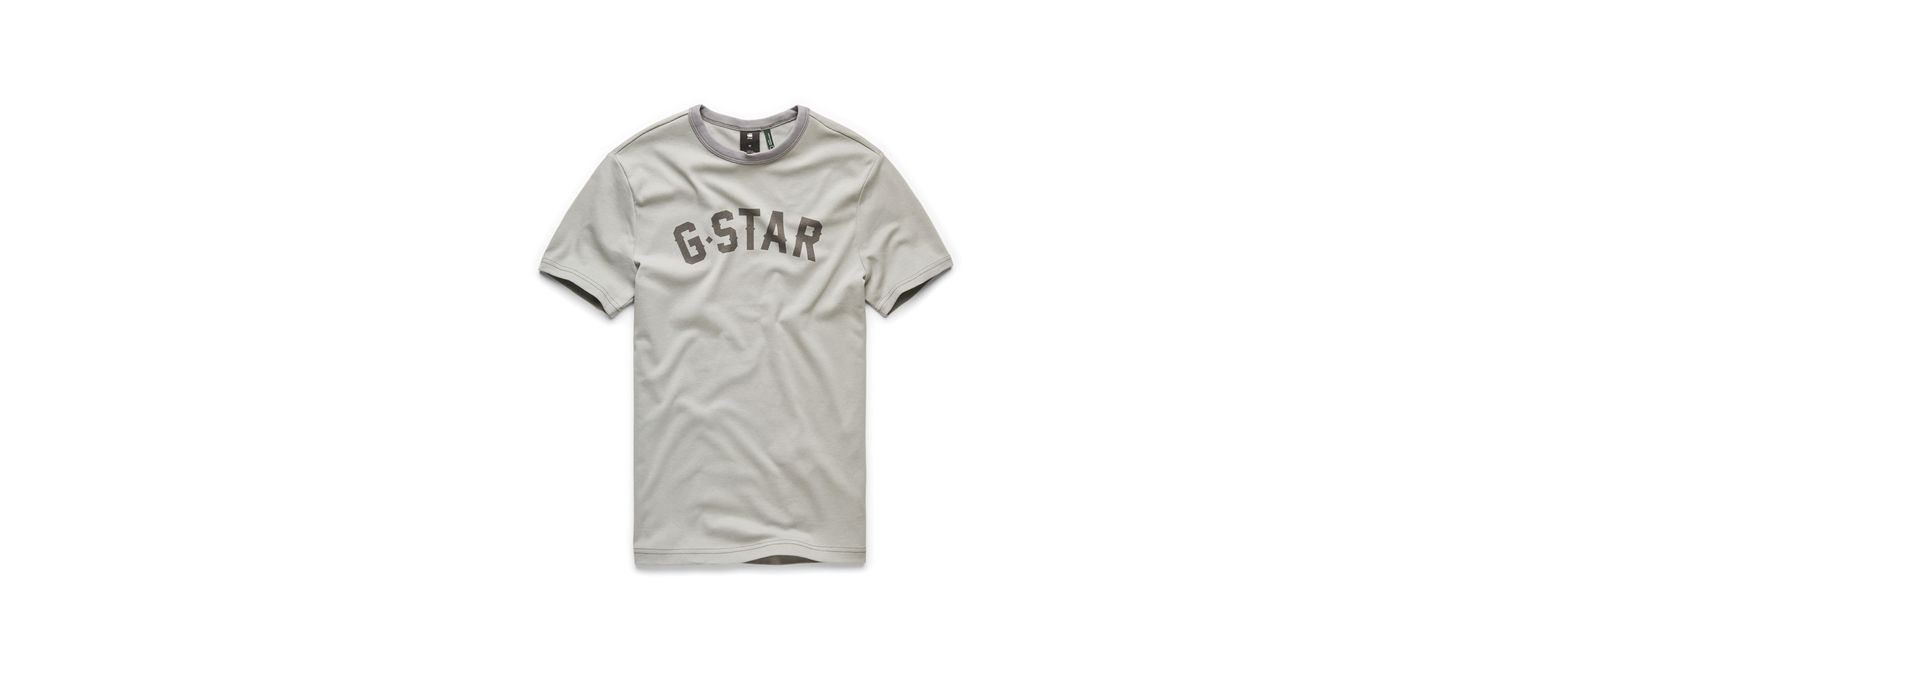 g star raw student discount